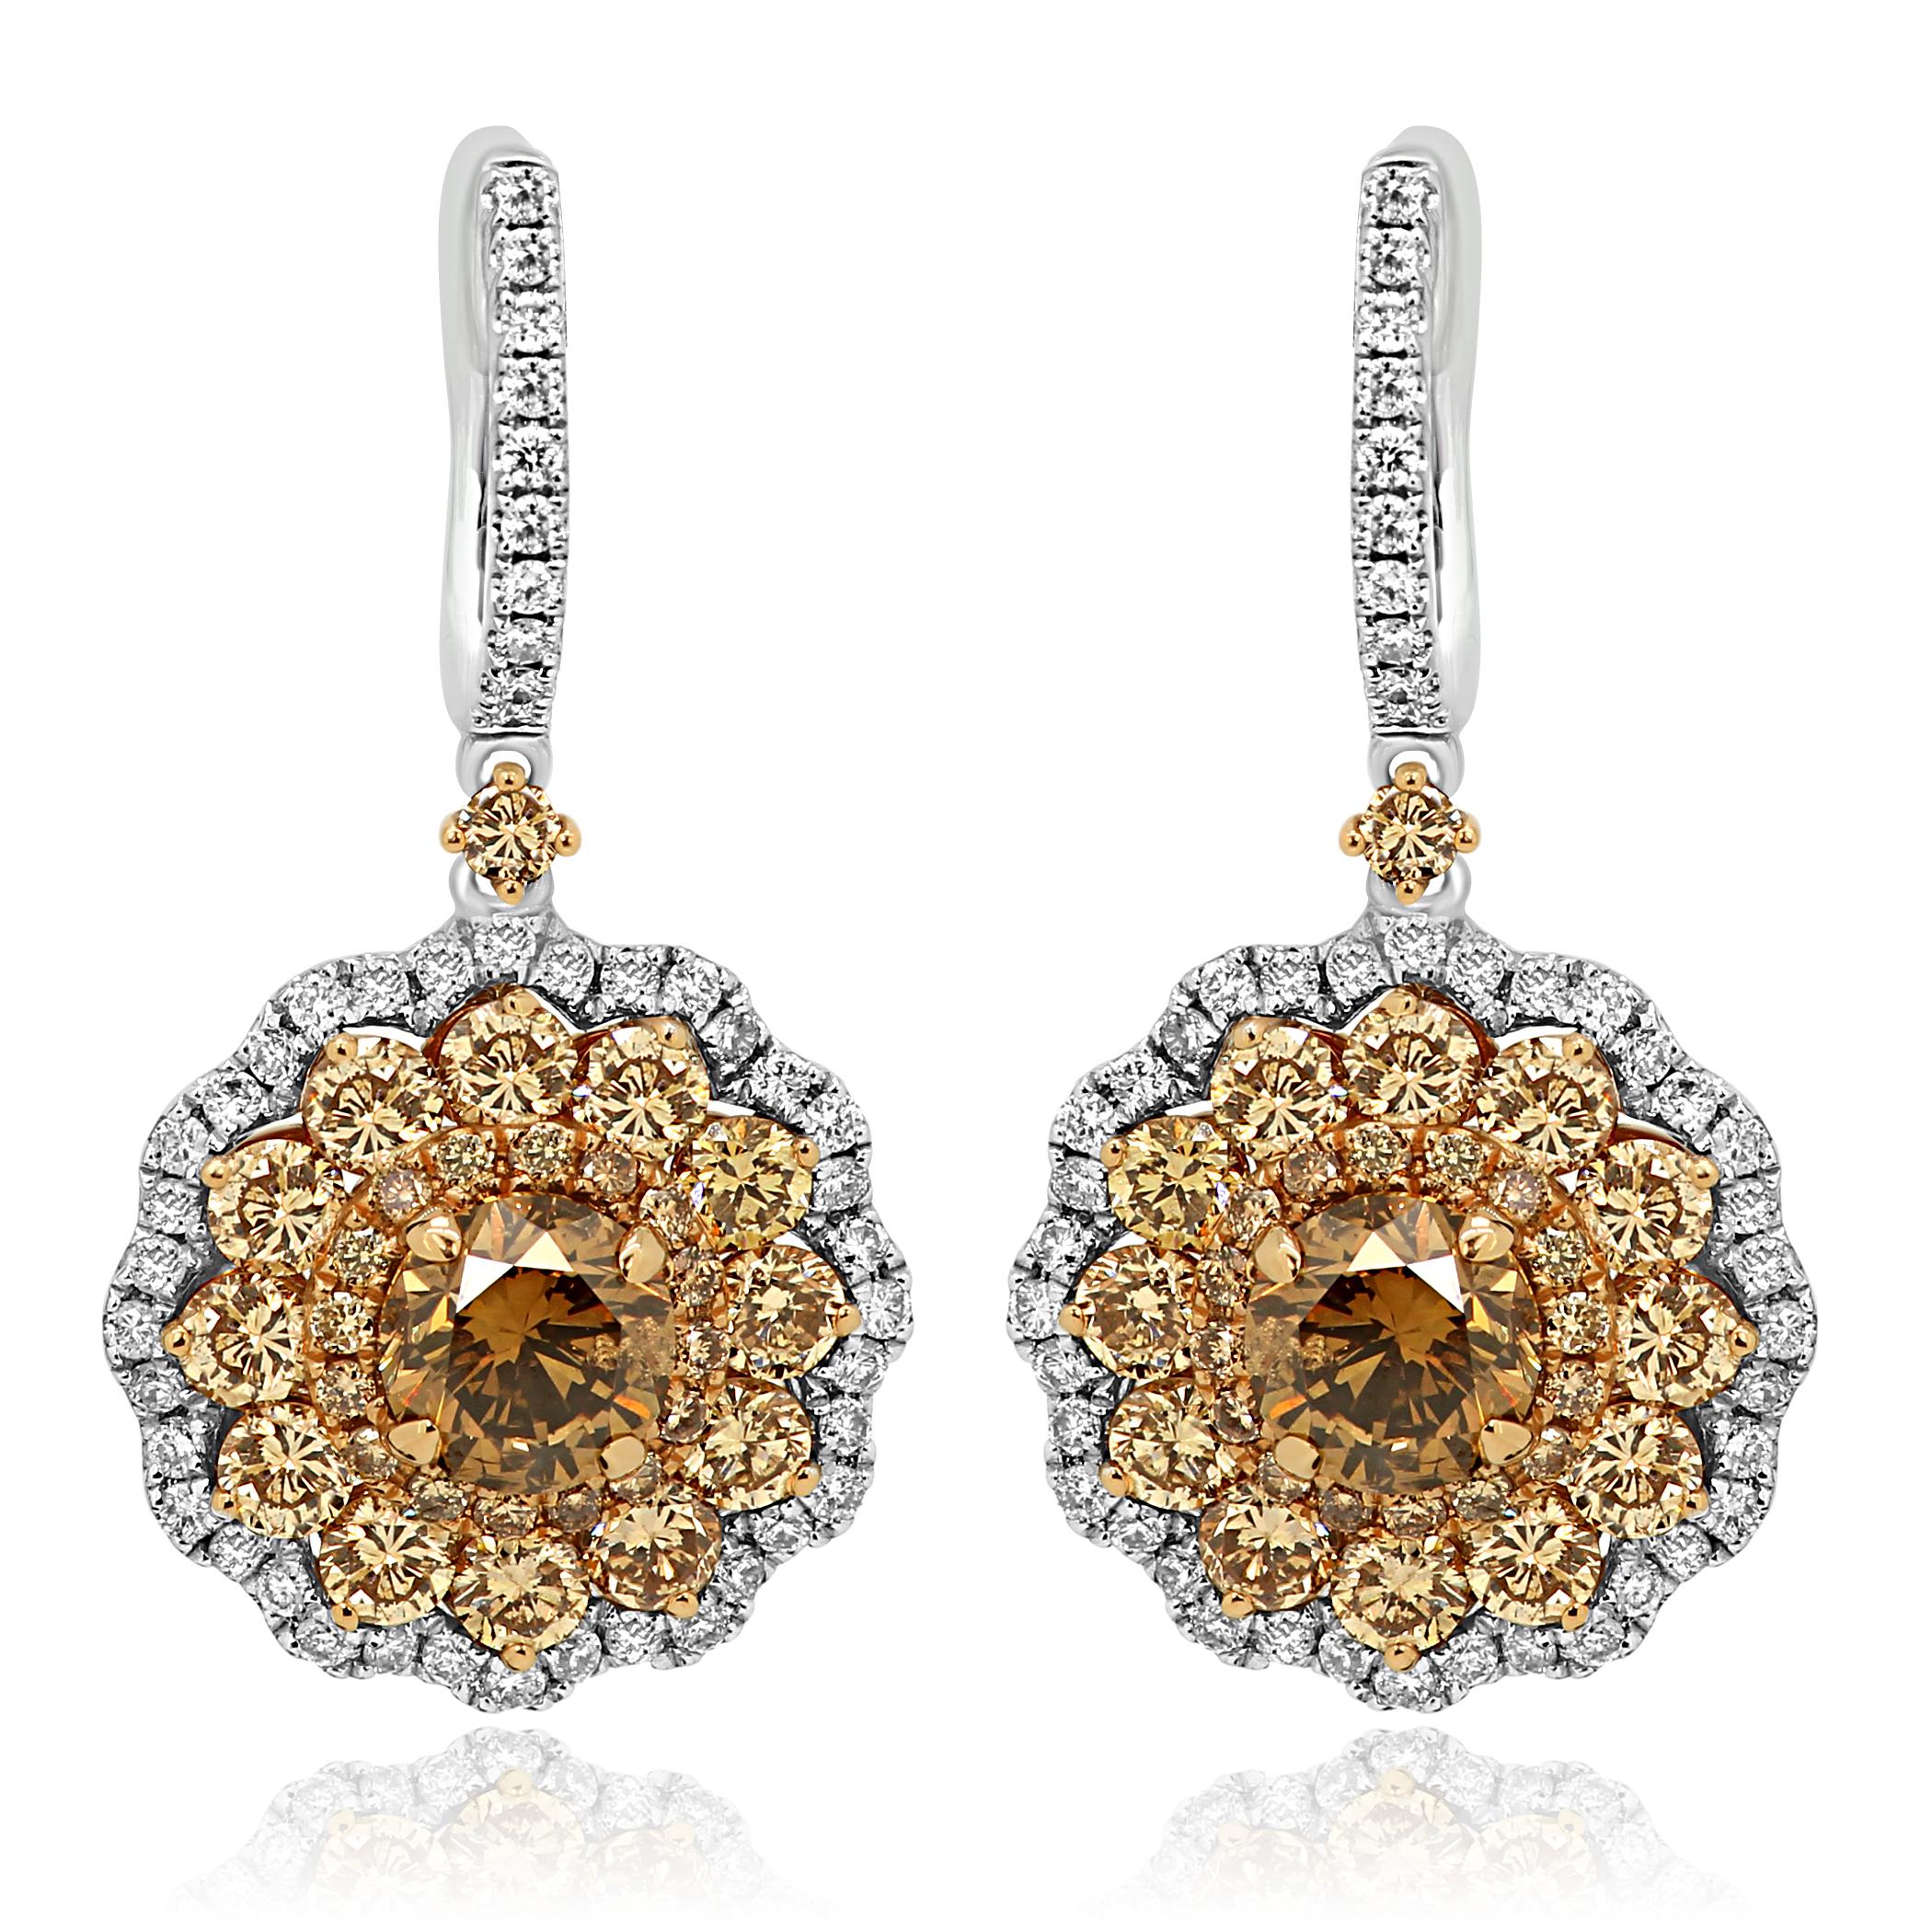 Gorgeous Earrings with 2 Champagne Round Diamonds 2.02 Carat encircled in Triple Halo Champagne Diamond Round 2.58 Carat and White Diamond Rounds 0.73 Carat set in 18K White and Rose Gold Intricately Hand Made Dangle Earrings.

Style available in